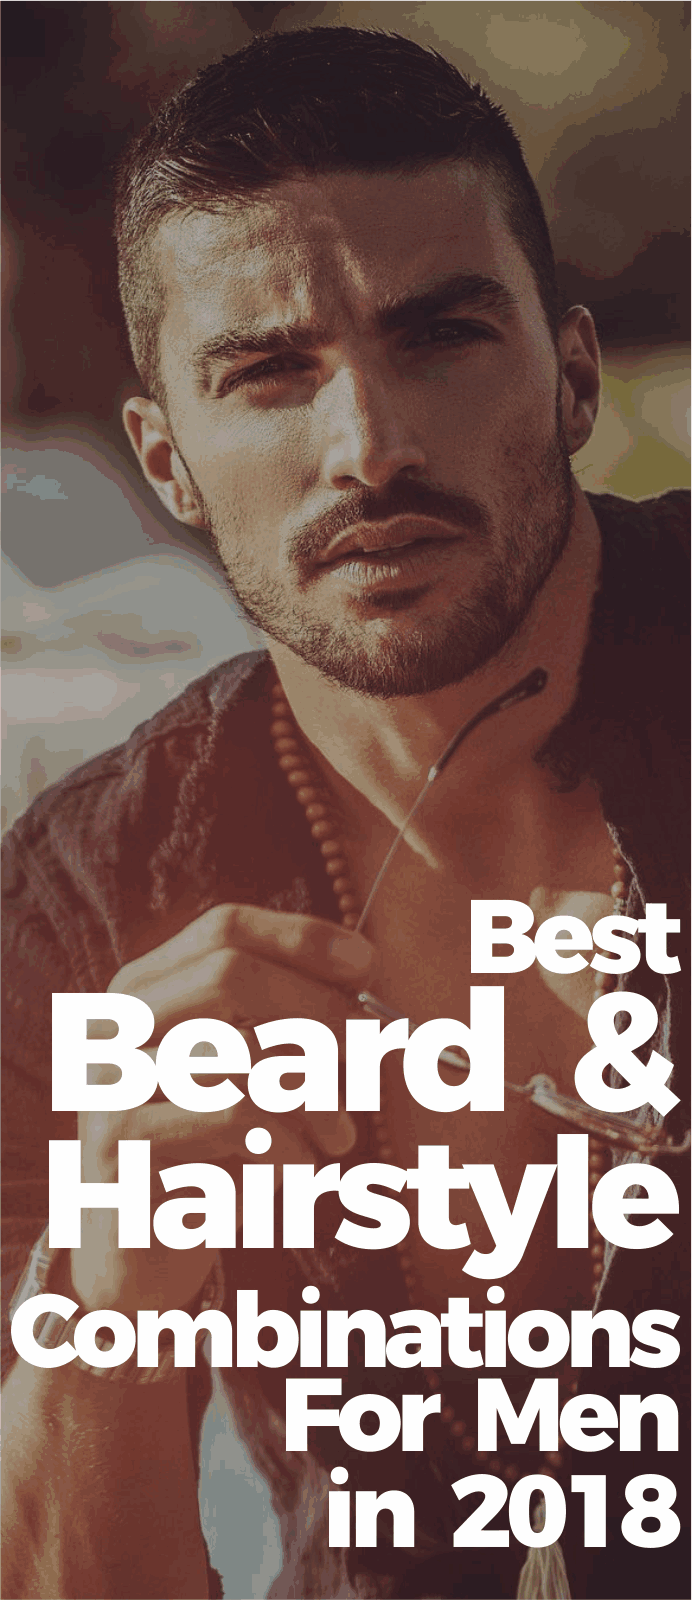 10 Perfect Beard & Hairstyle Combinations To Choose From